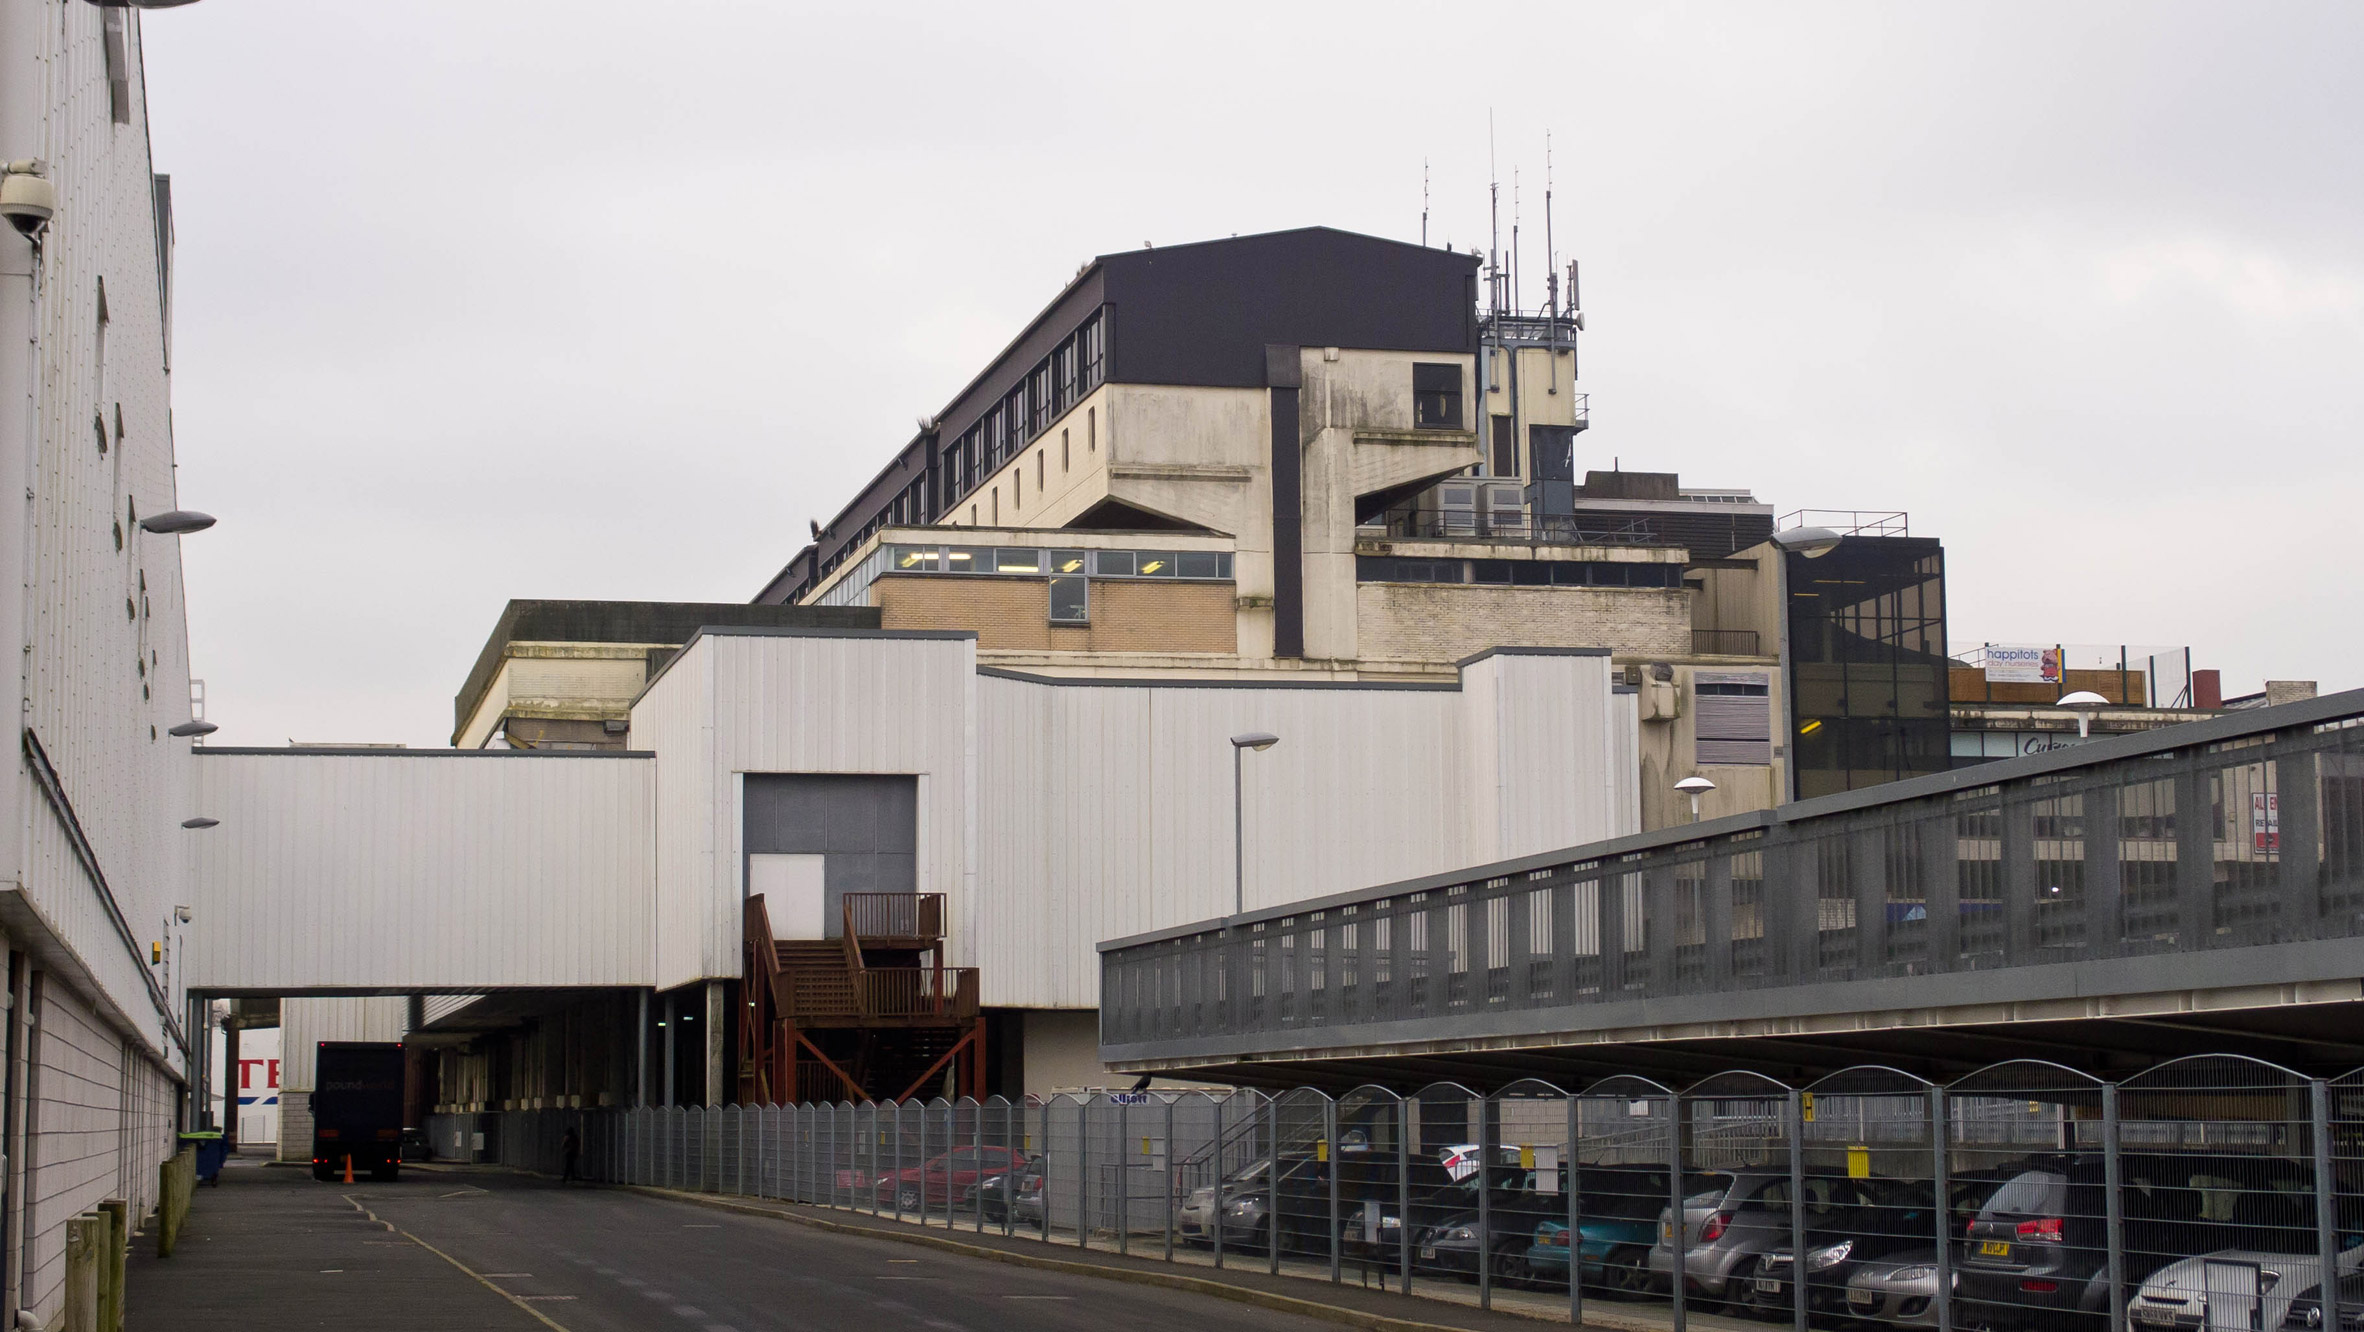 Cumbernauld's brutalist town centre is set to be demolished